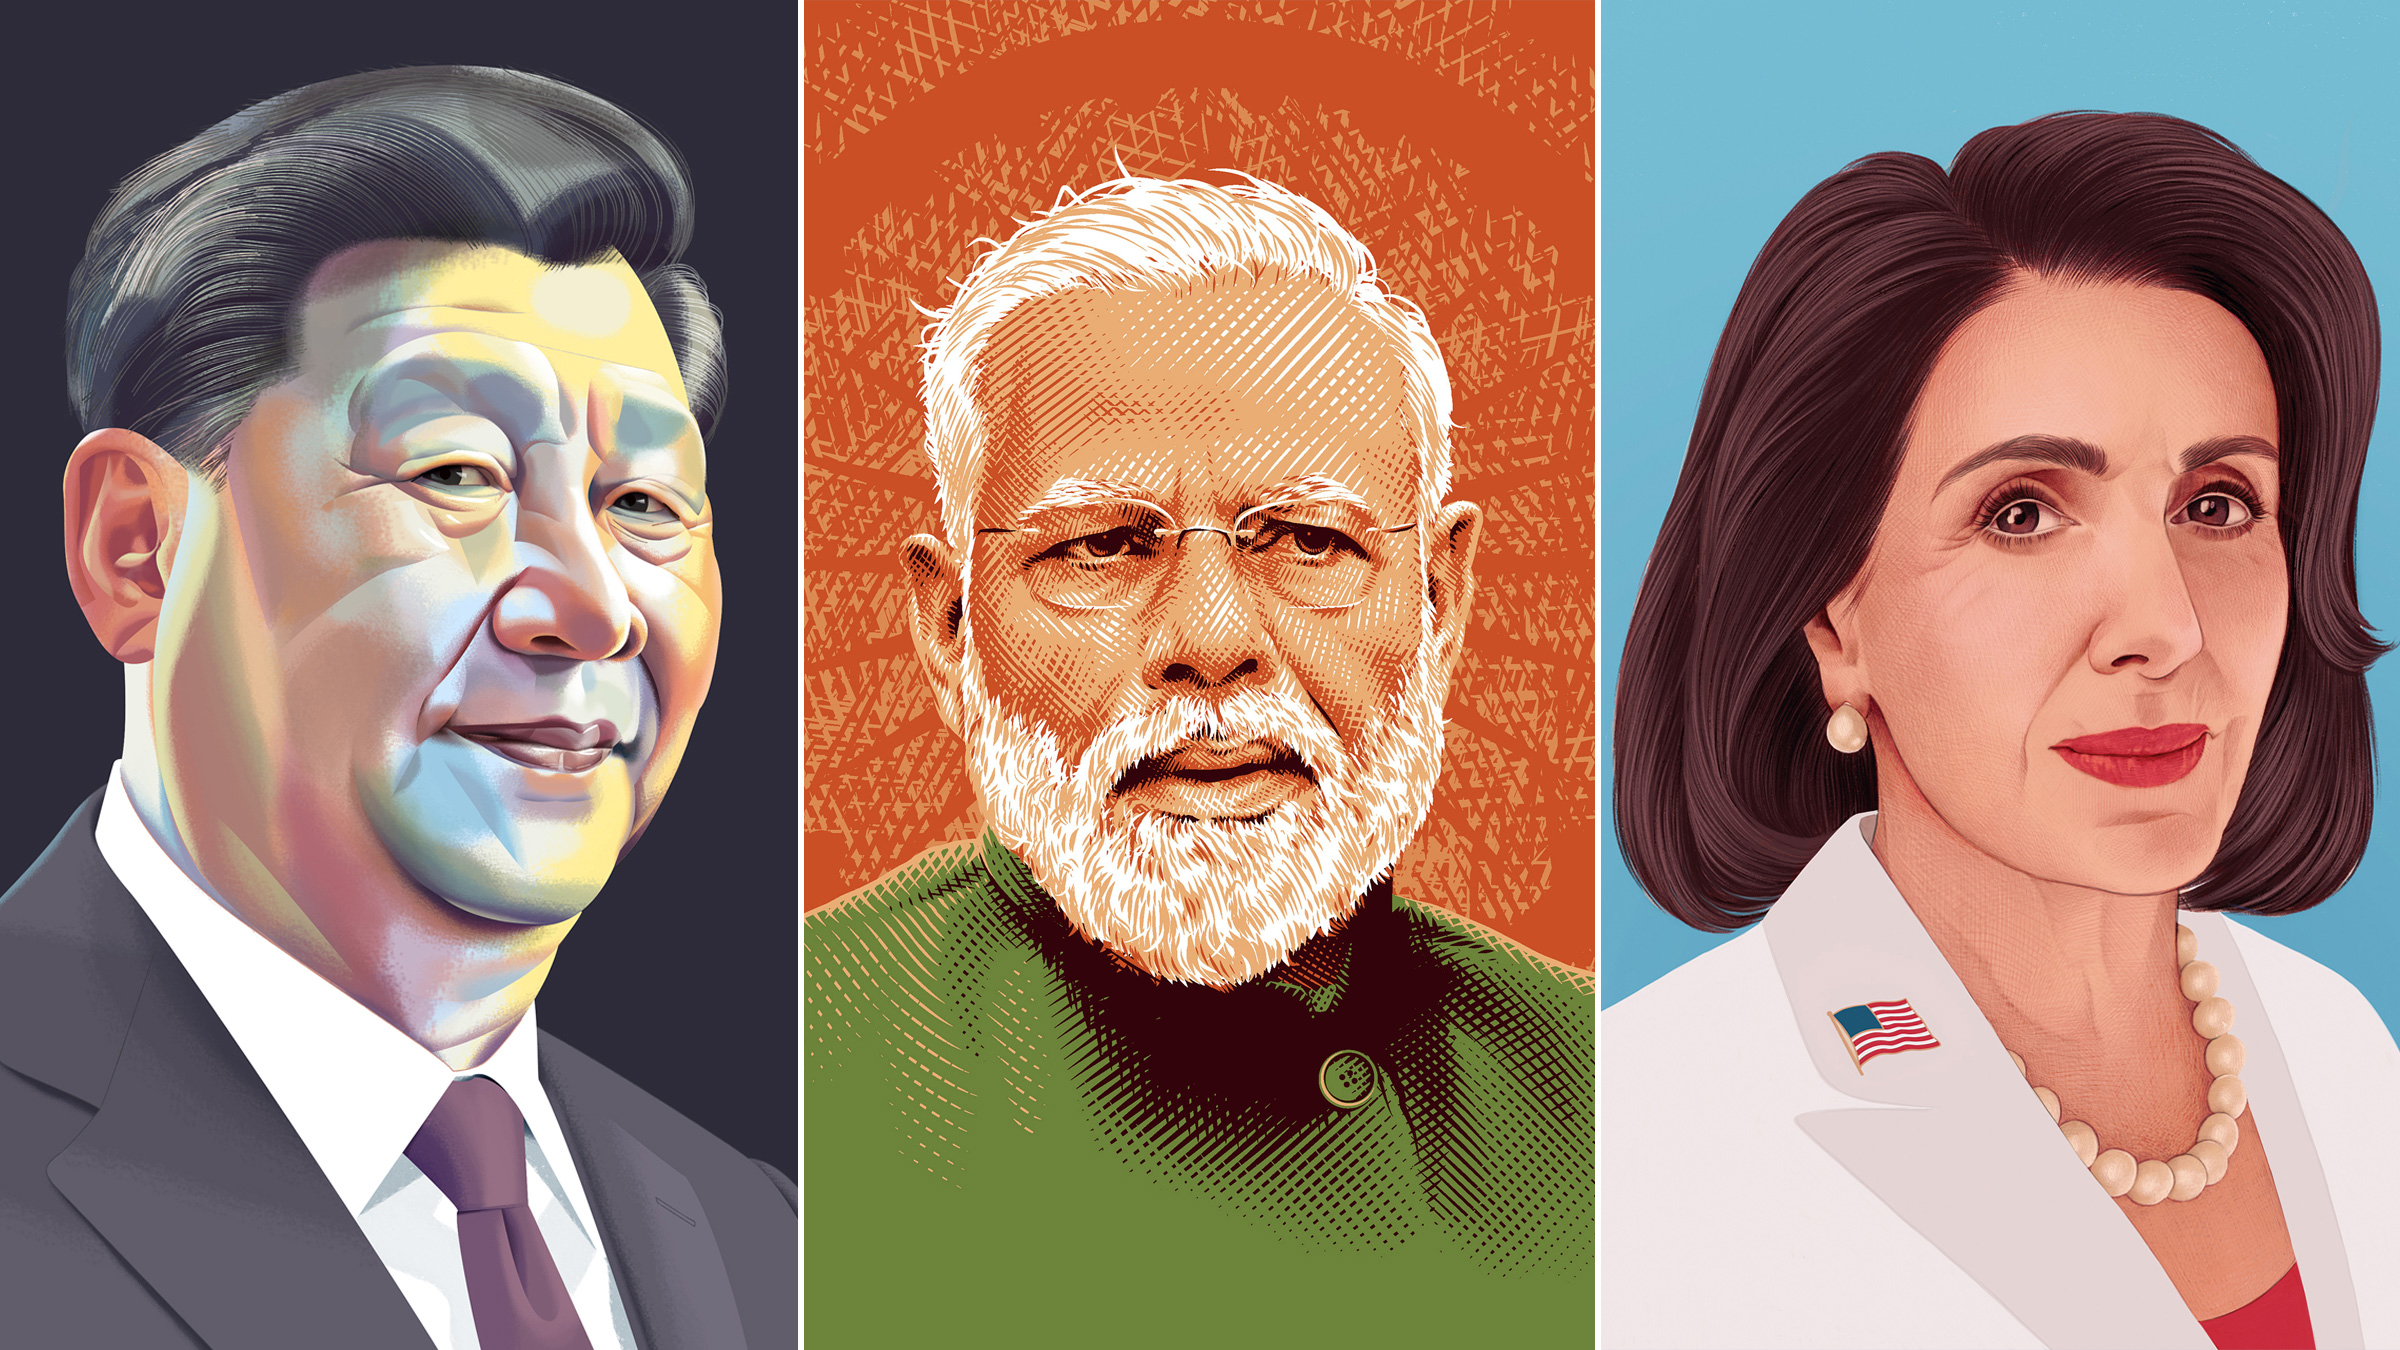 These 6 Leaders Shaped the World in 2019